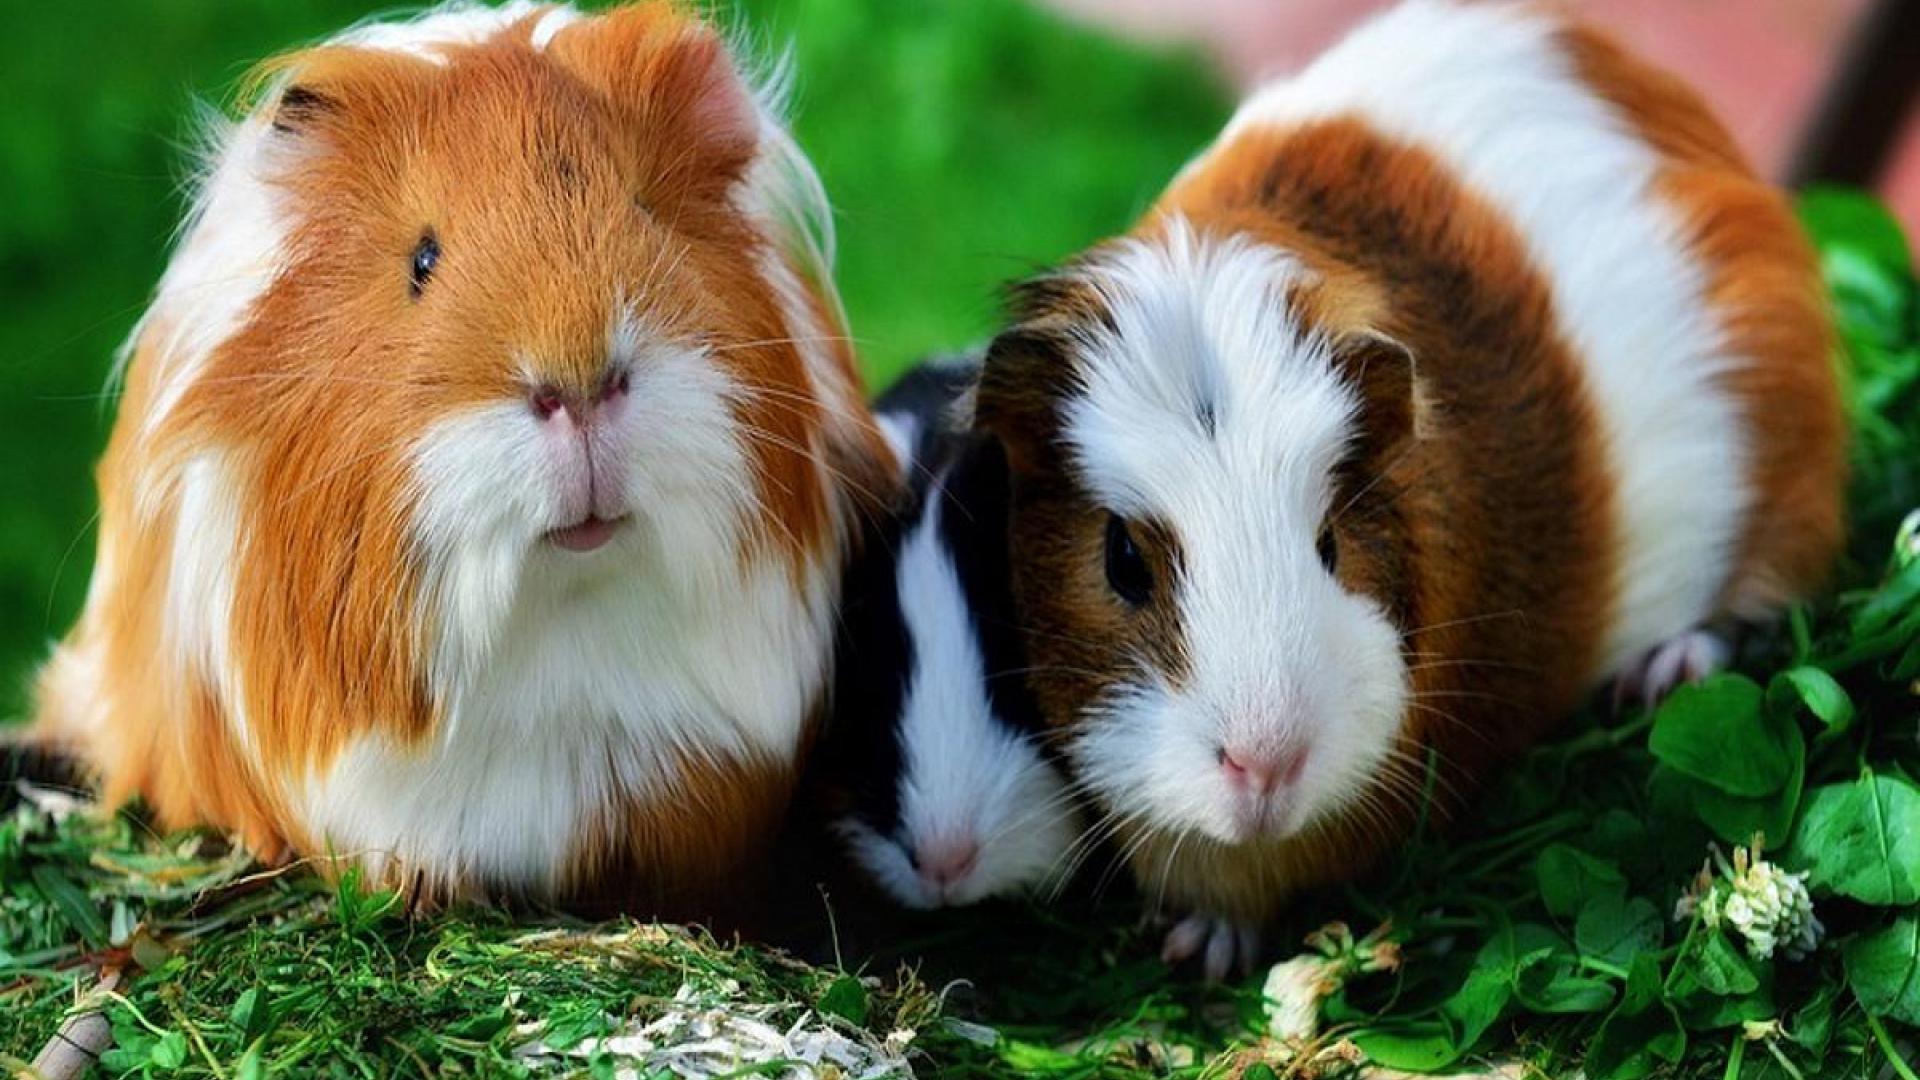 Cute Guinea Pig Wallpaper (image in Collection)